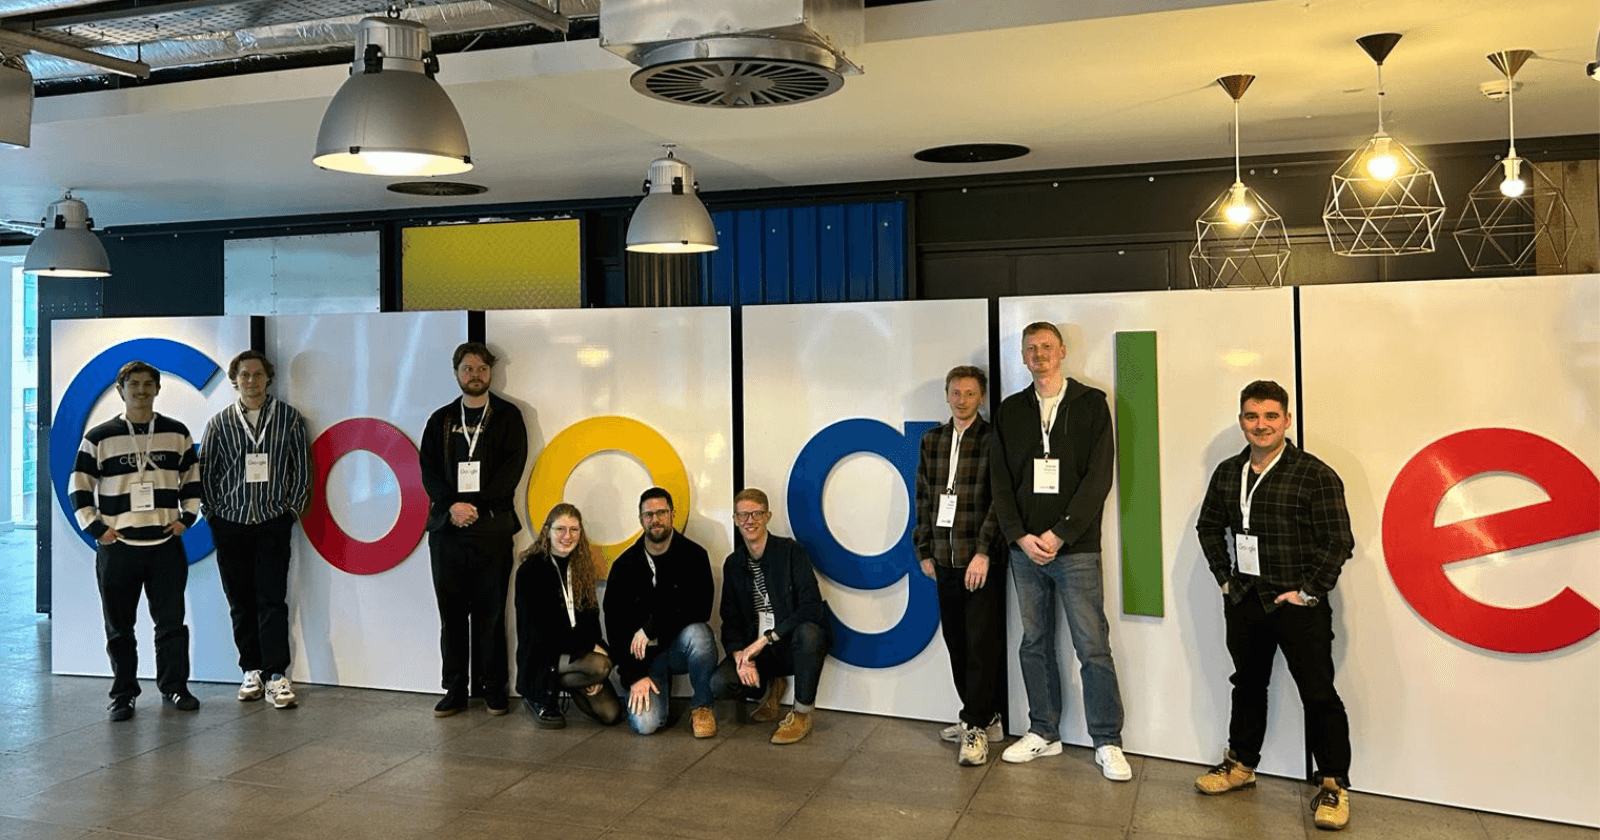 PPC team in front of the Google logo